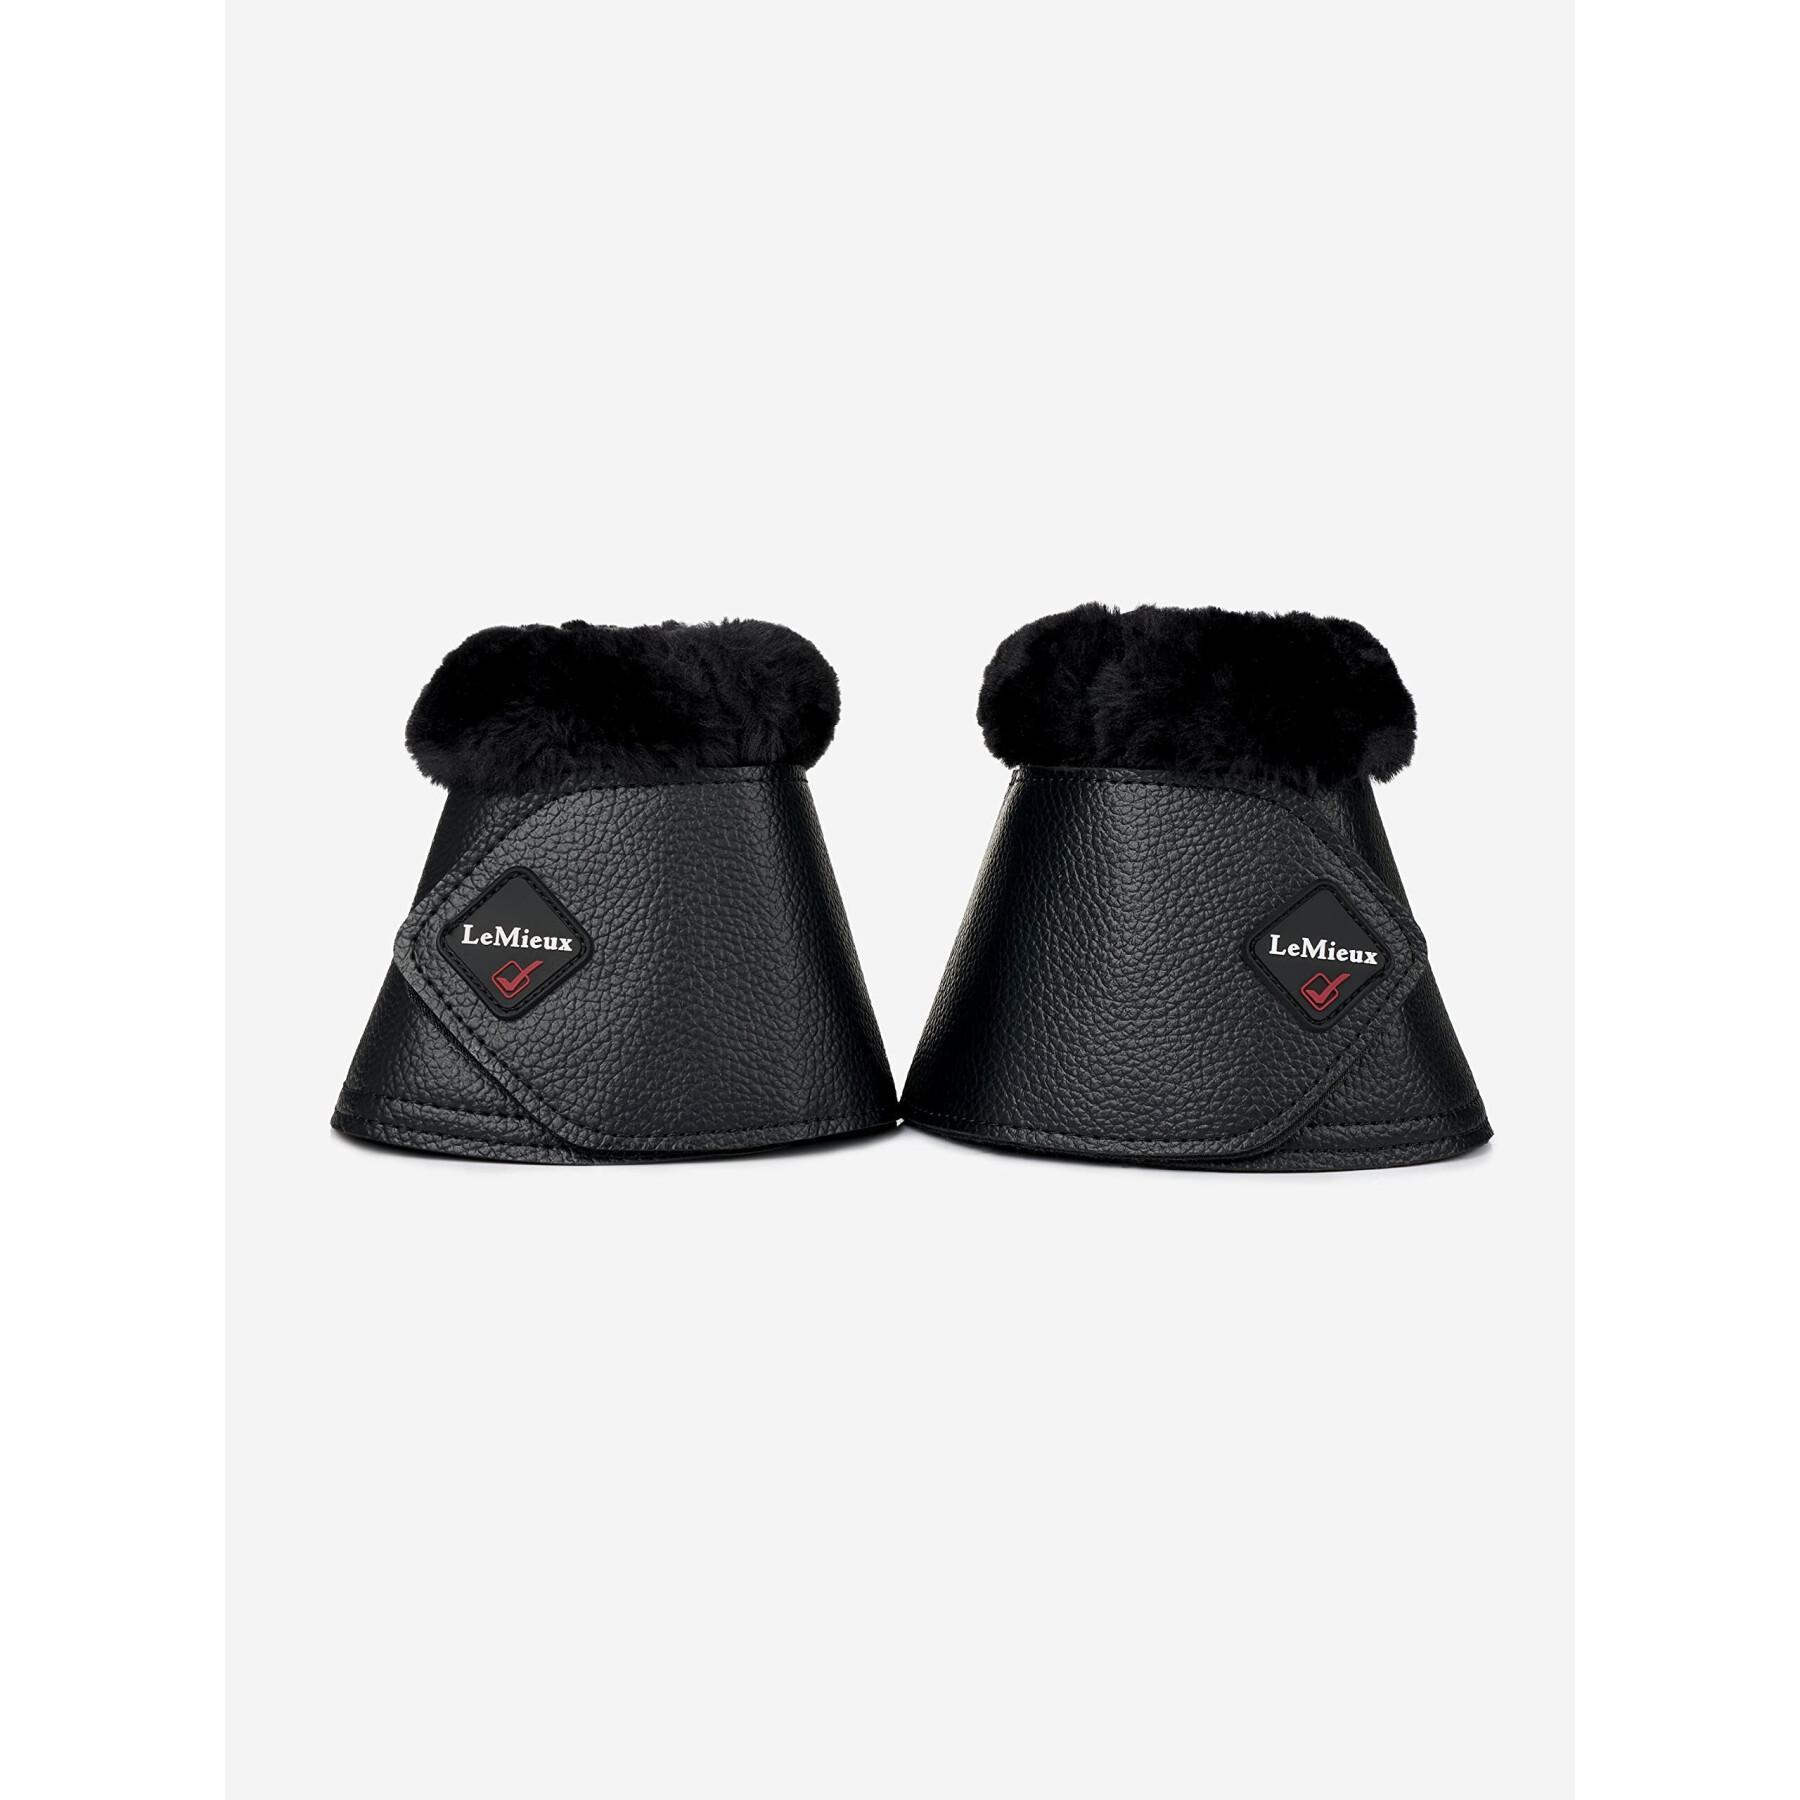 Hind leg gaiters for horses LeMieux WrapRound Over Reach